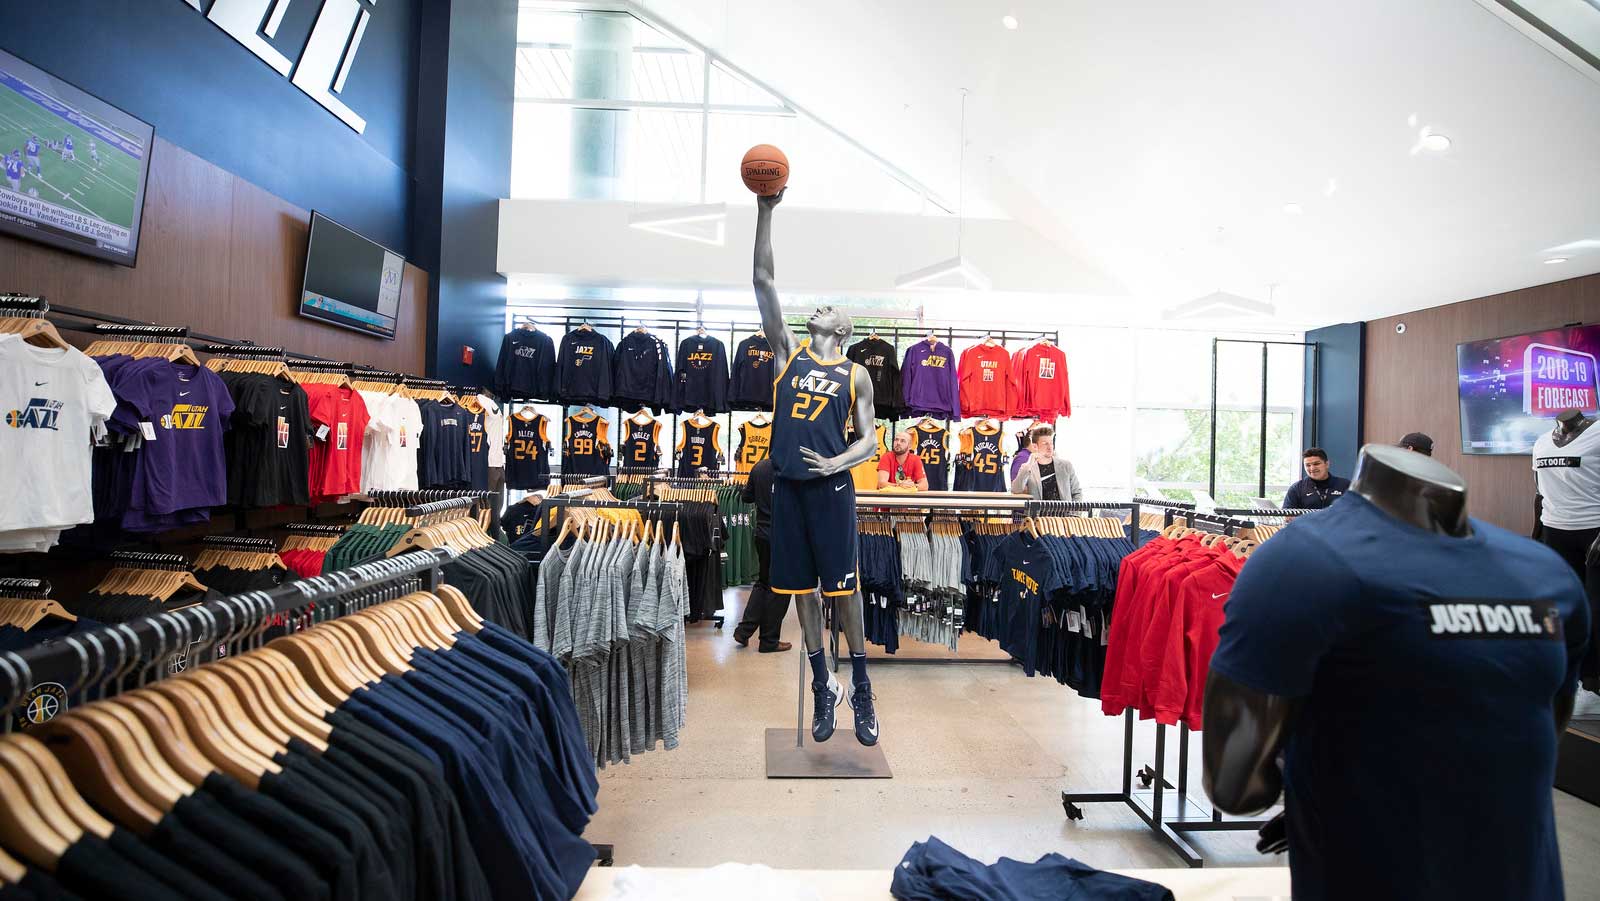 Jazz Team Store to Celebrate Re-Opening at Vivint Smart Home Arena with  Public Event on May 23 – The Larry H. Miller Company